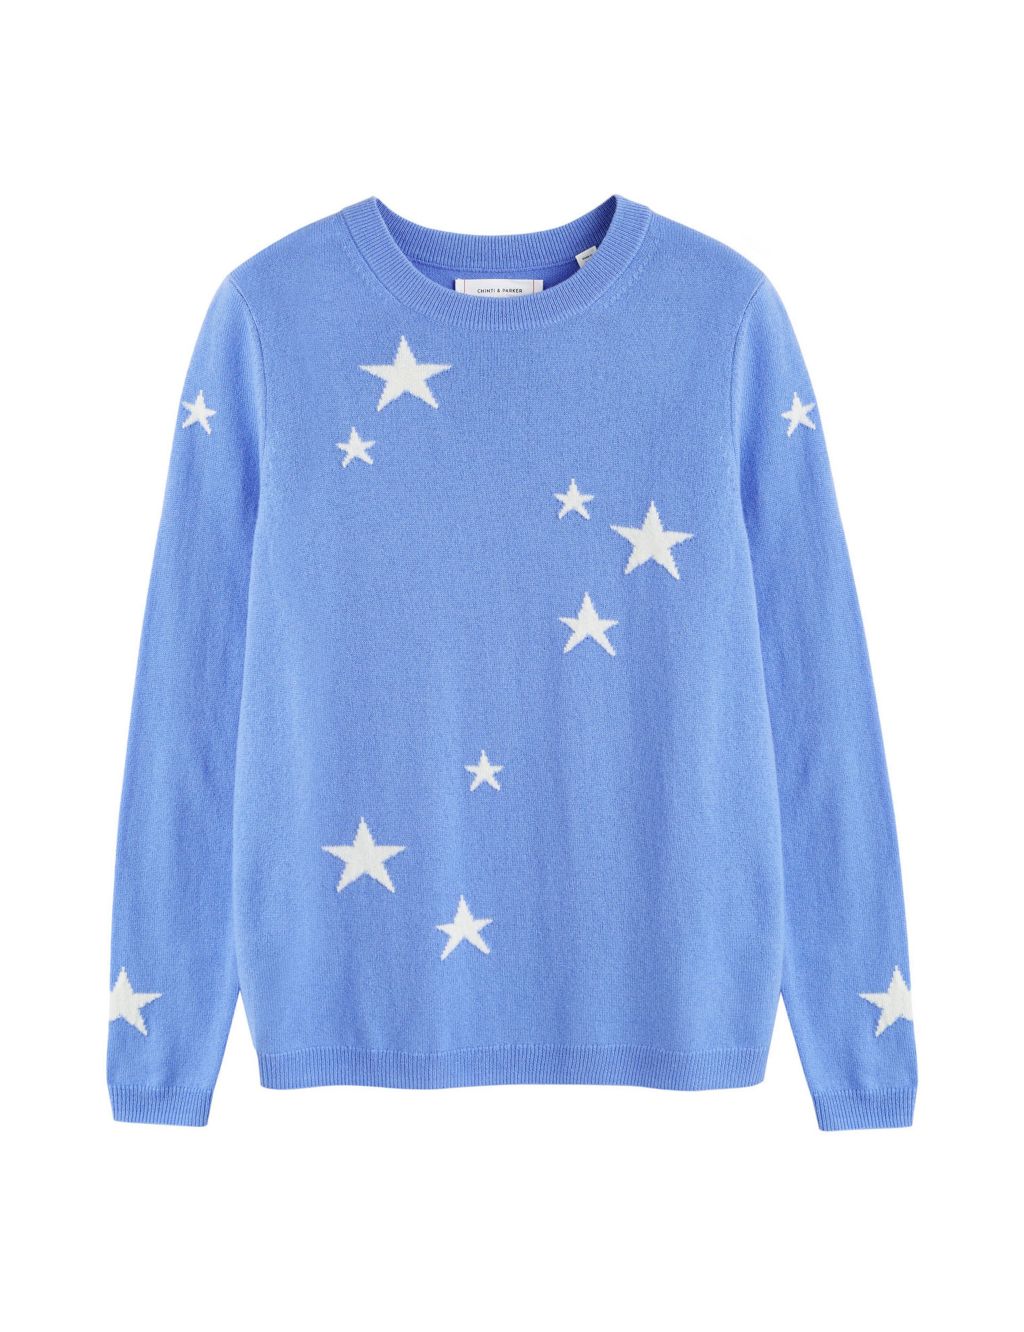 Wool Rich Star Jumper with Cashmere image 2